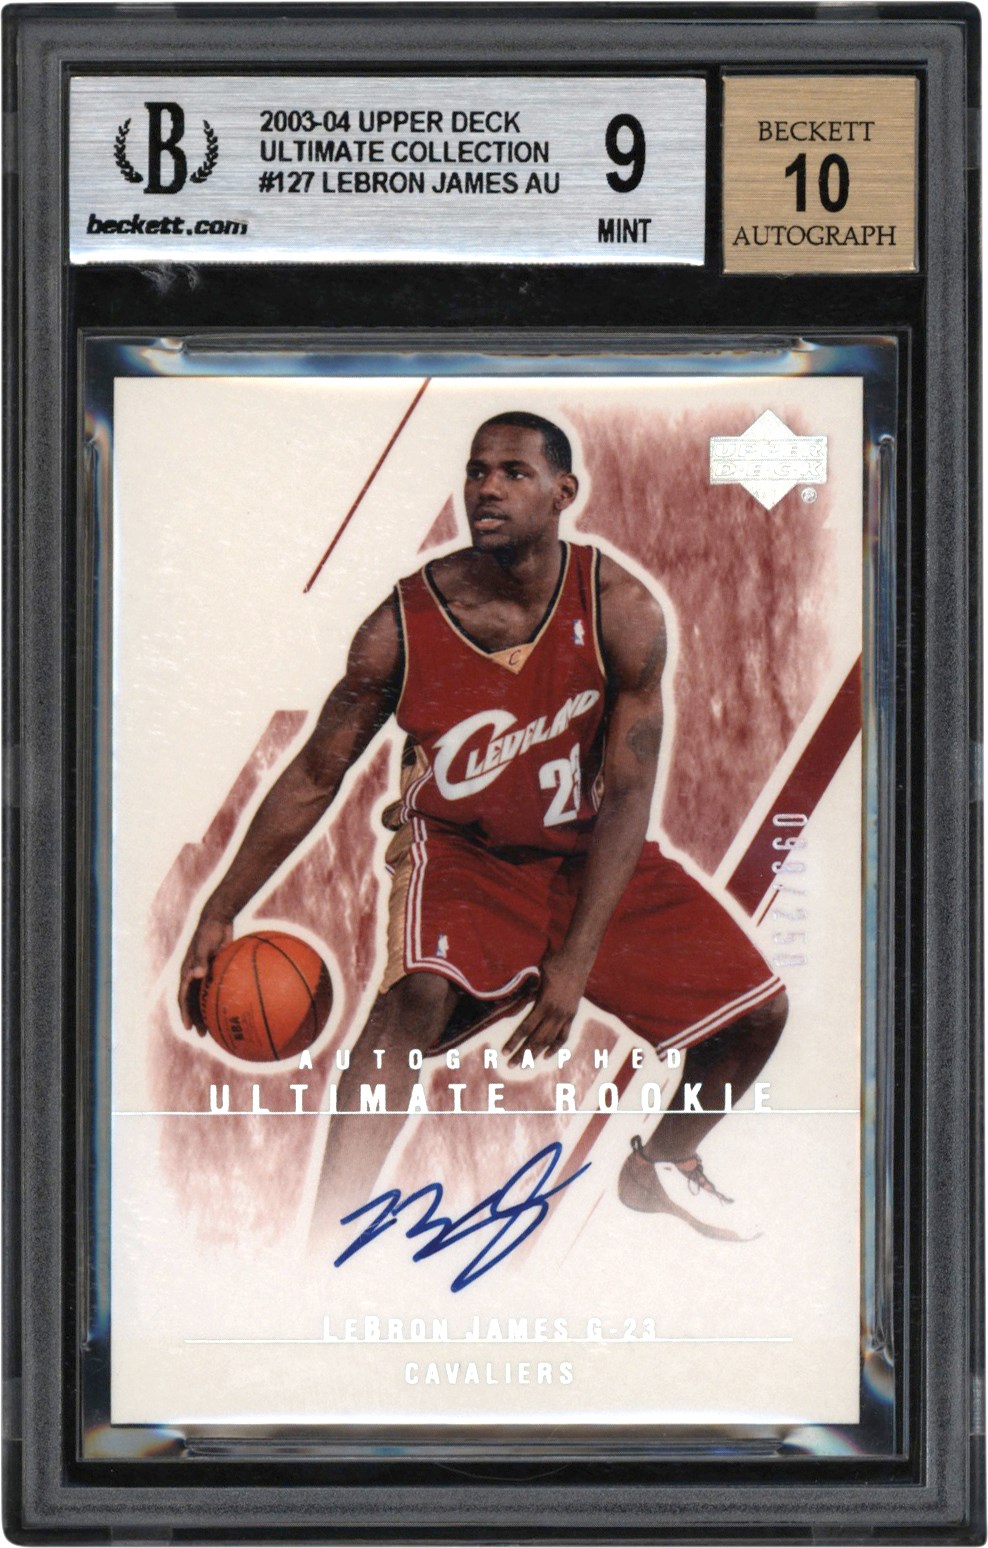 Basketball Cards - 03 Ultimate Collection Basketball #127 LeBron James Autograph Rookie Card #99/250 BGS MINT 9 Auto 10